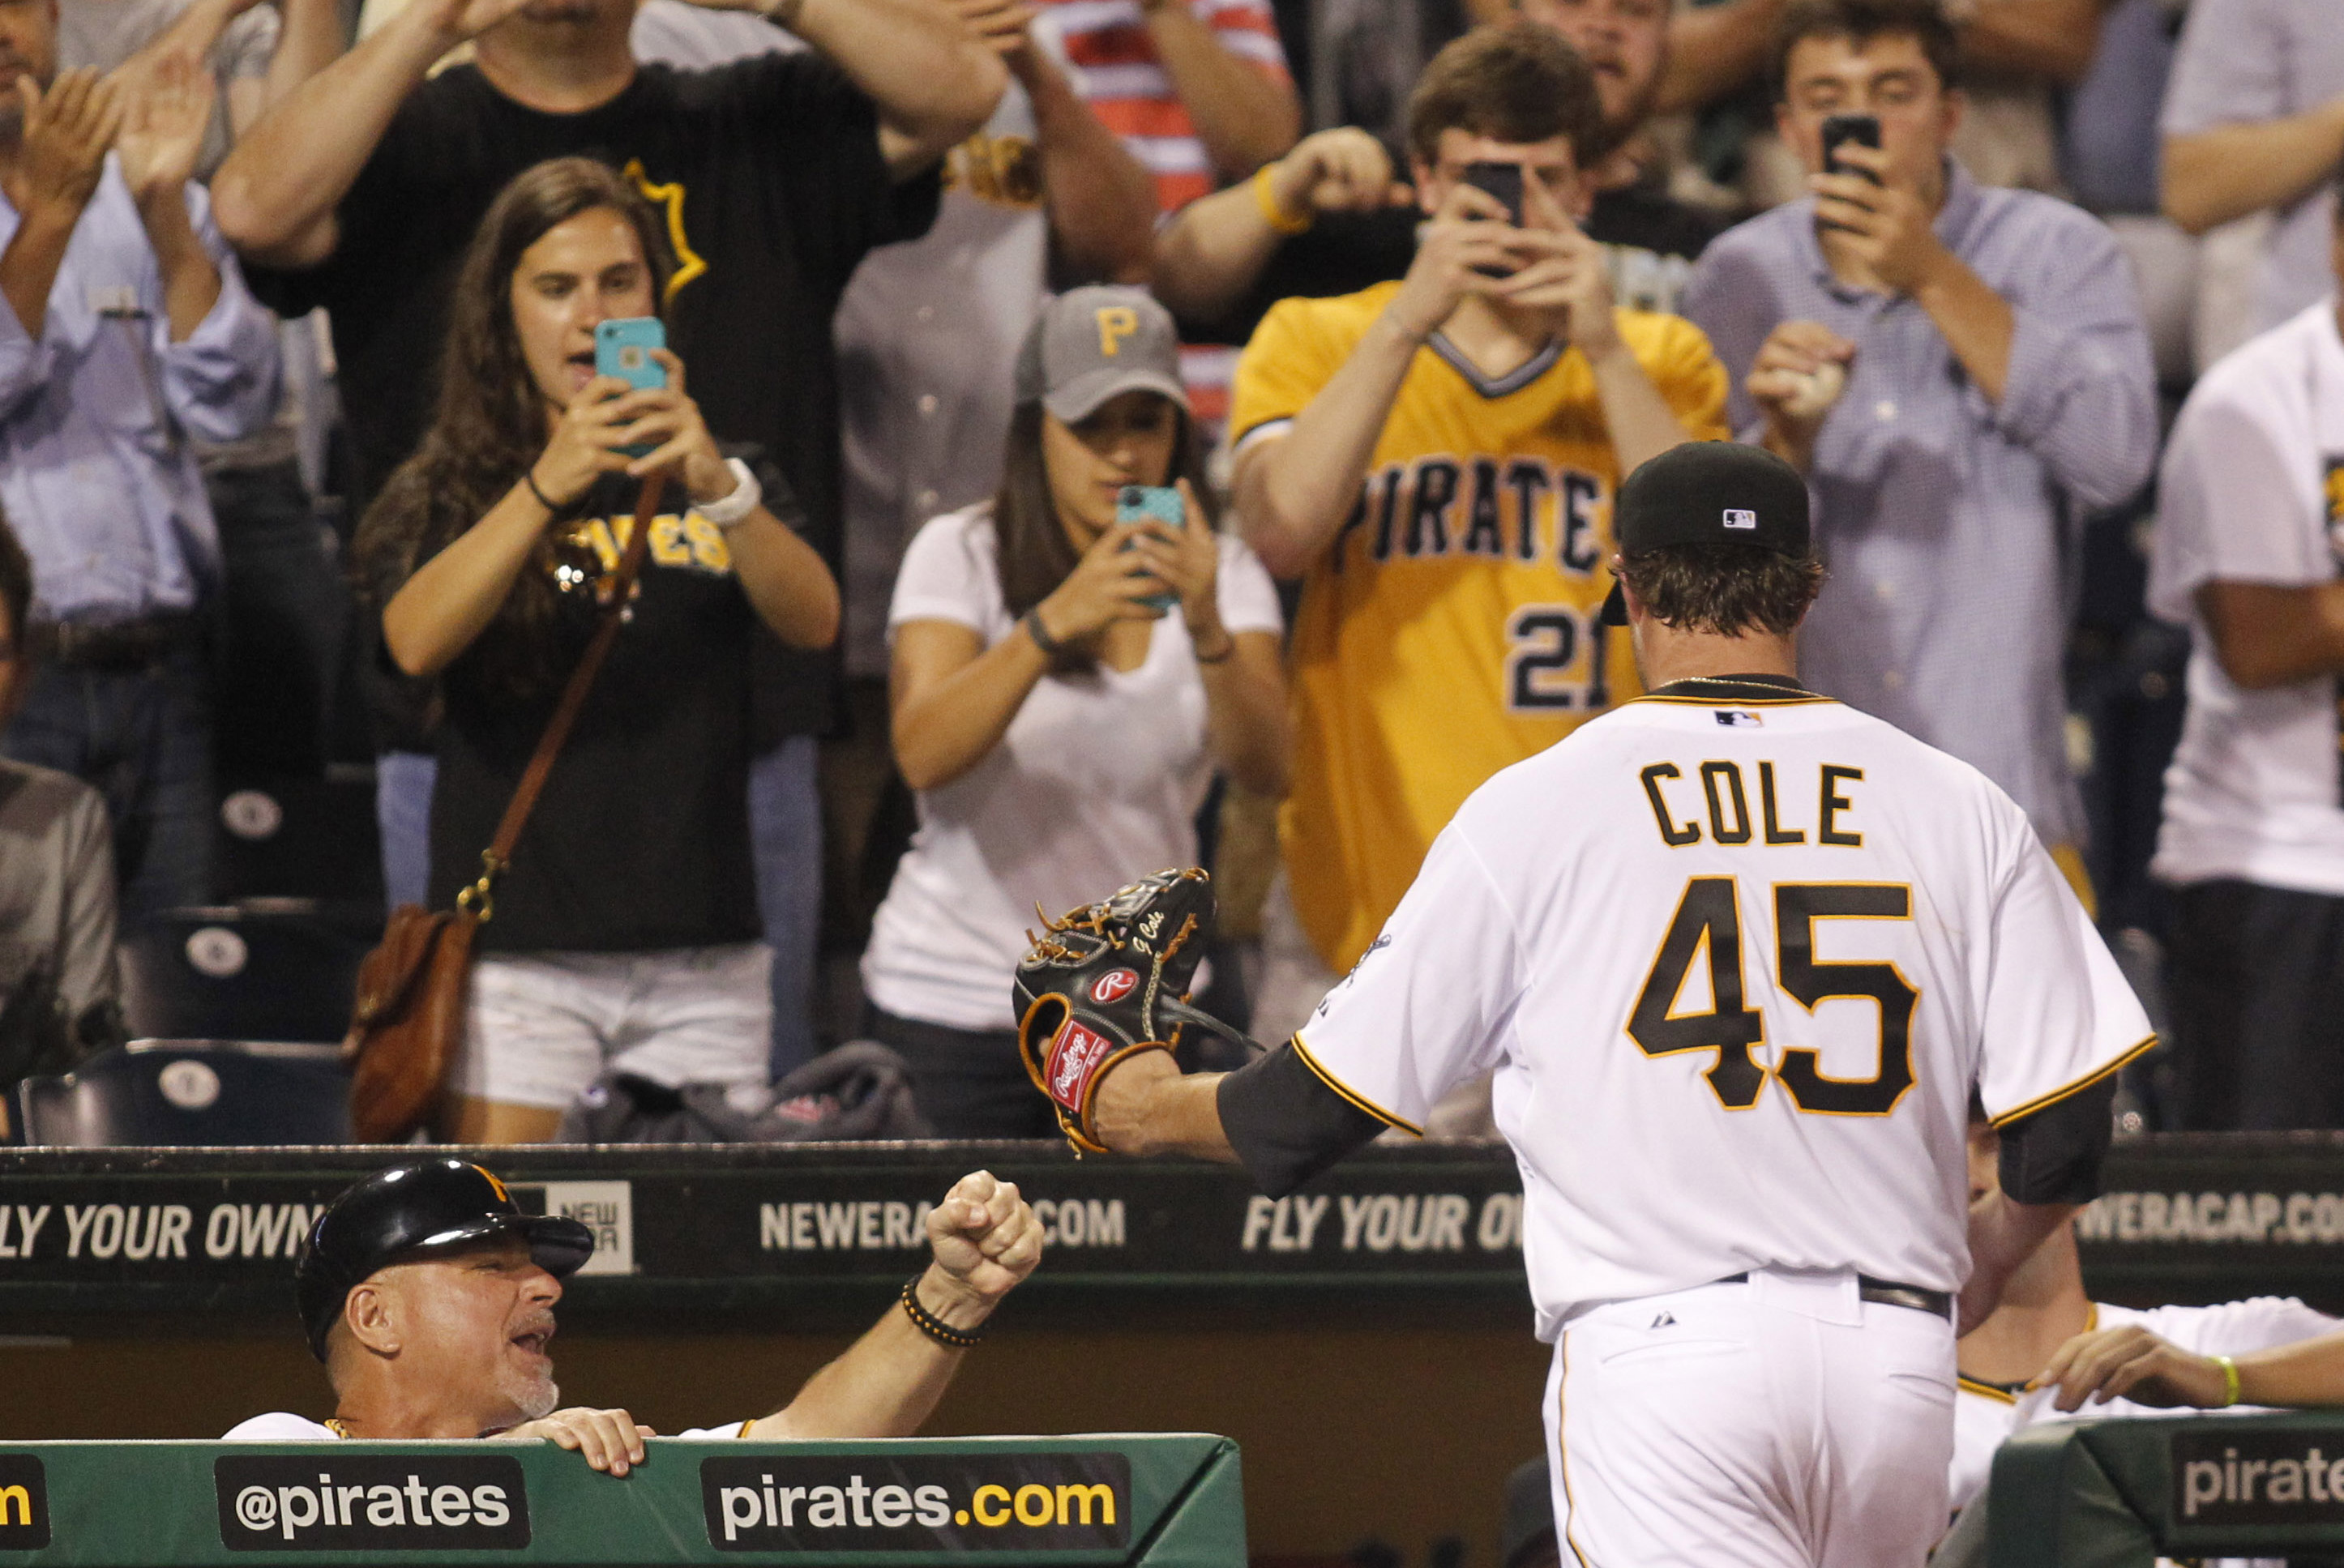 Pirates' loss Tuesday about more than Gerrit Cole